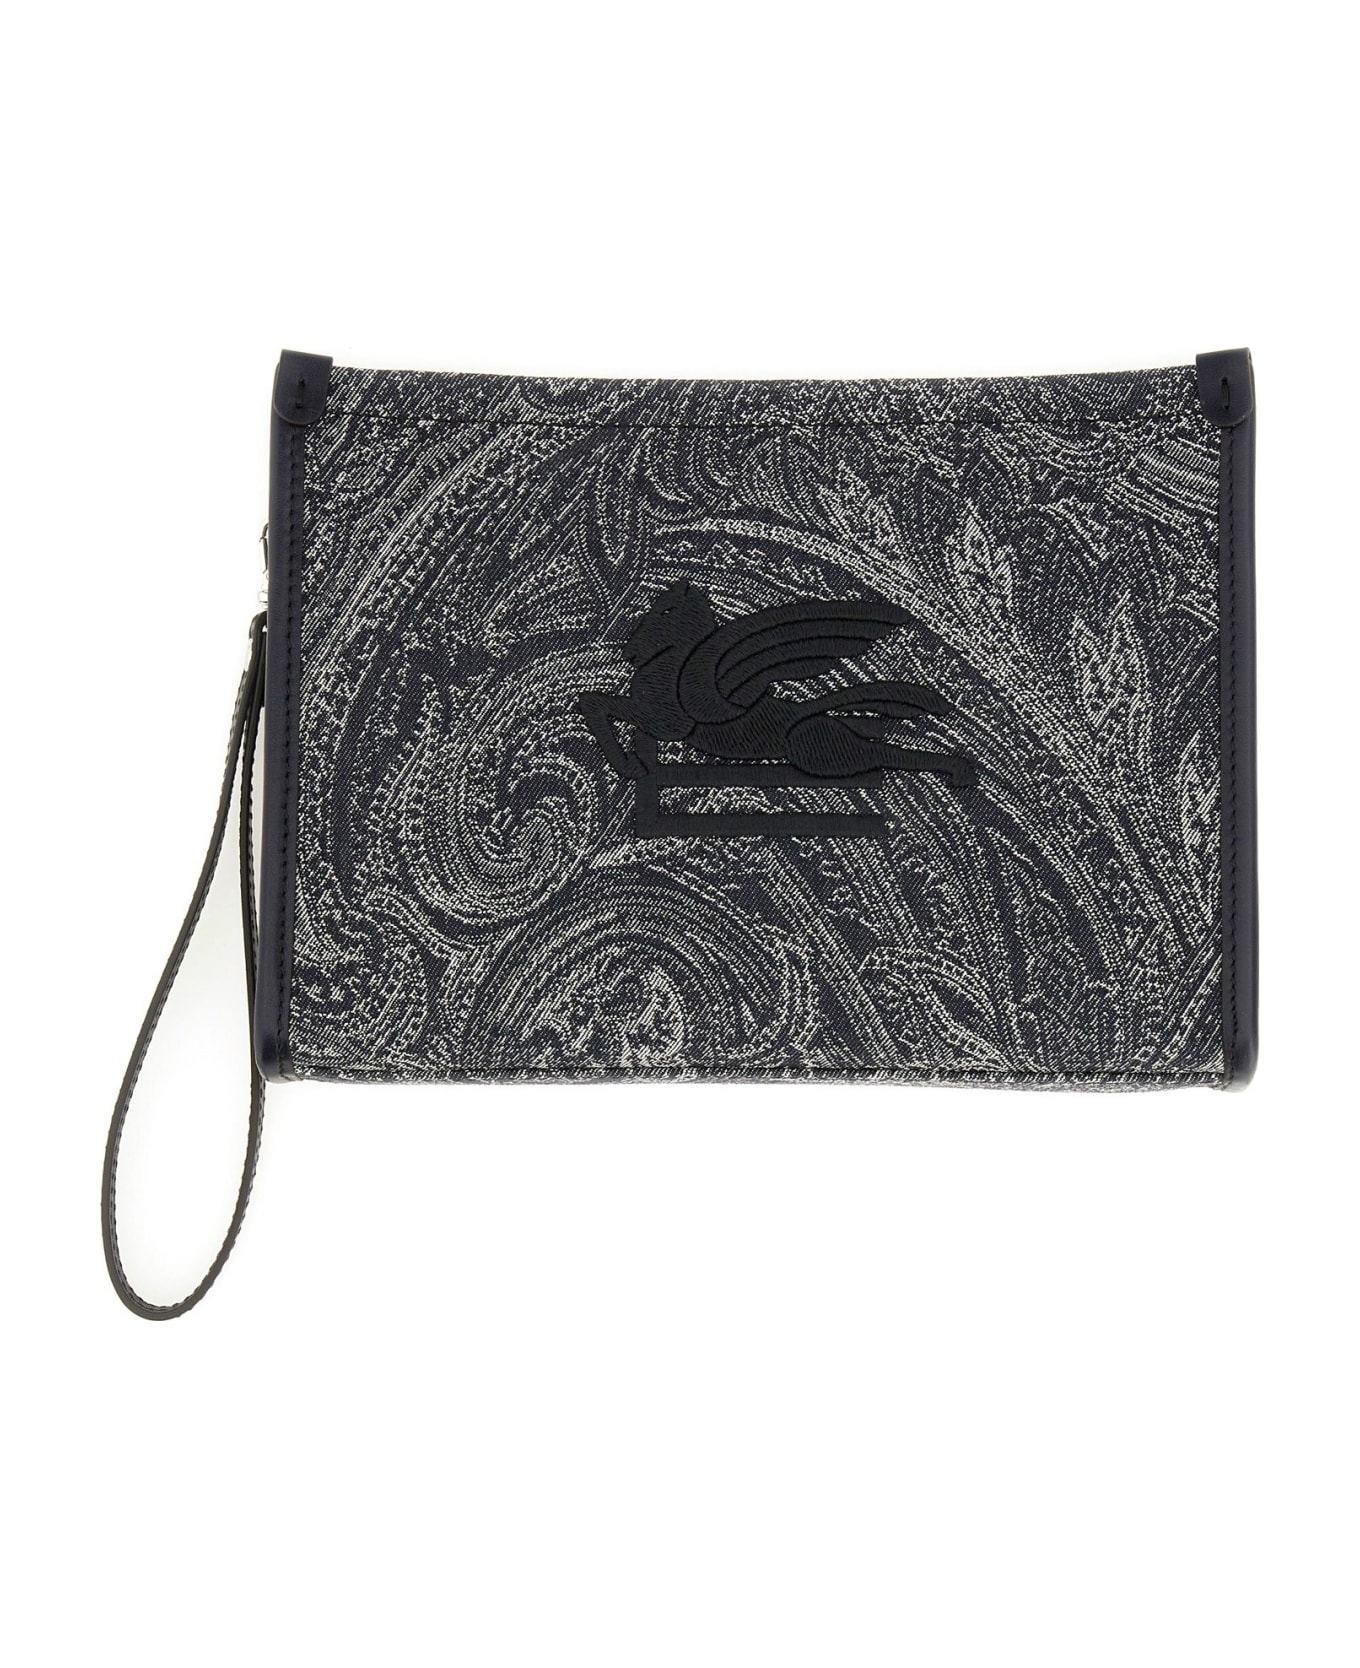 Etro Navy Blue Pouch With Paisley Jacquard Motif - Blue